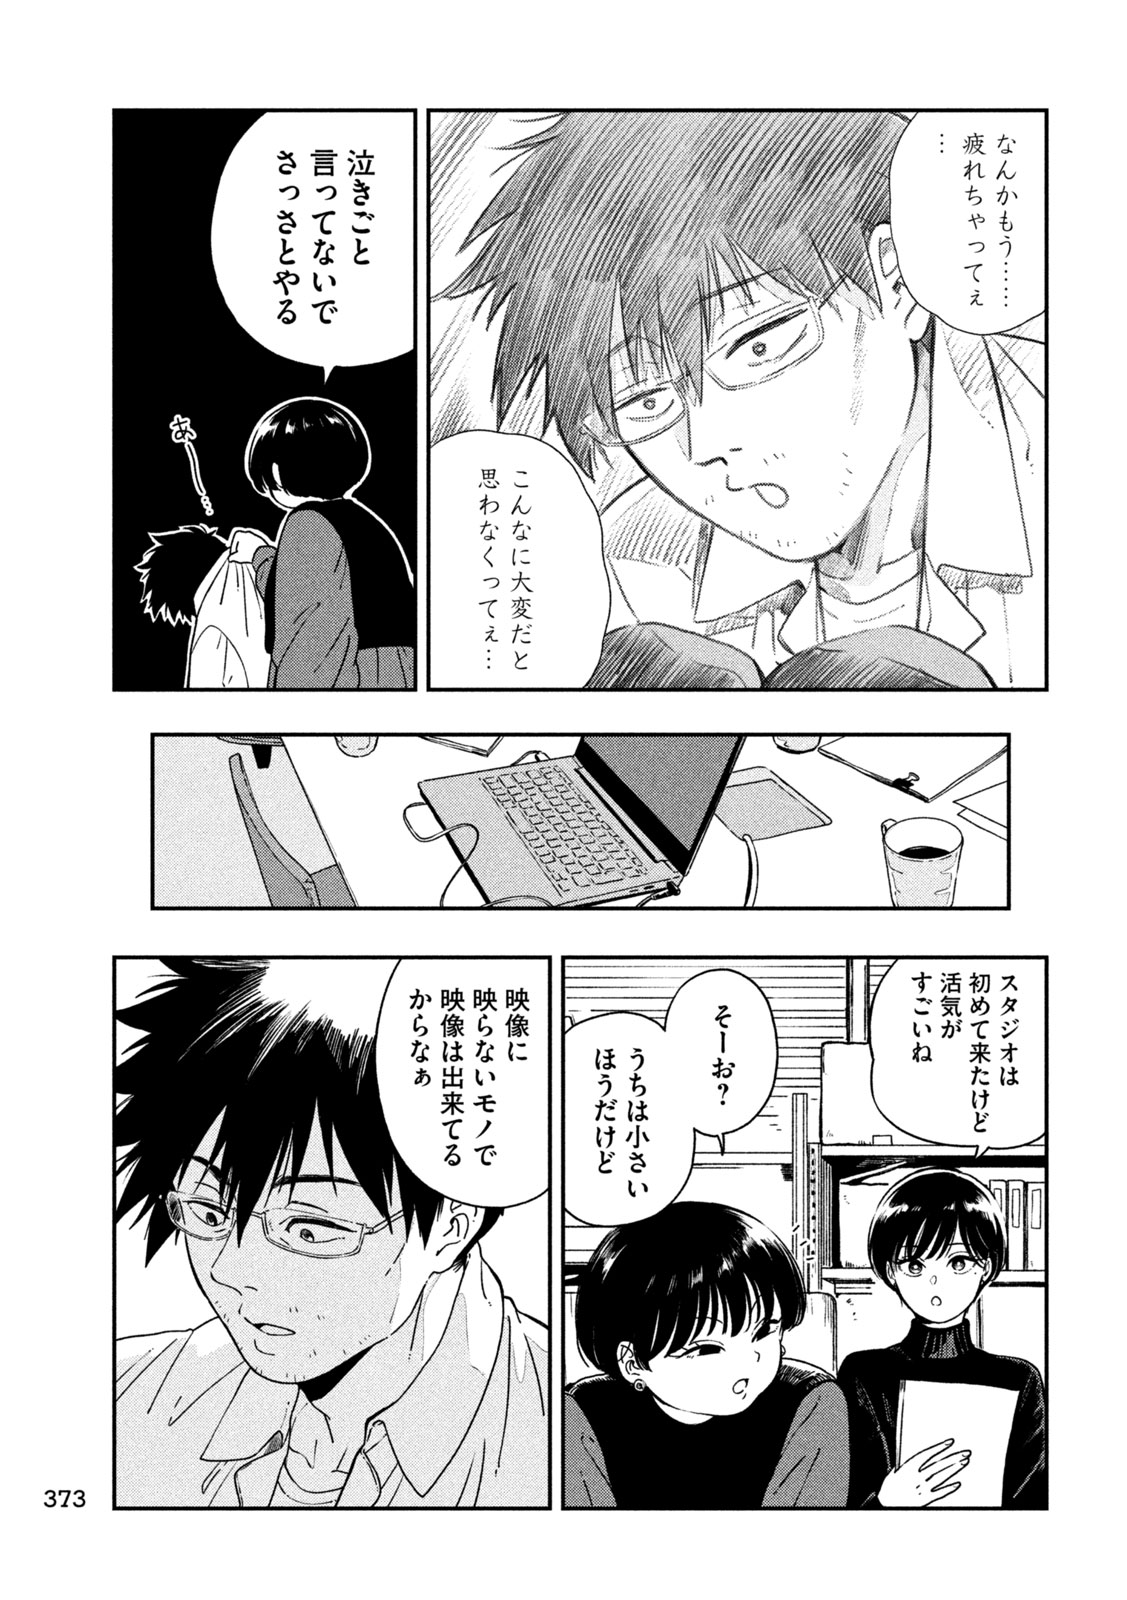 Ame to Kimi to - Chapter 118 - Page 13